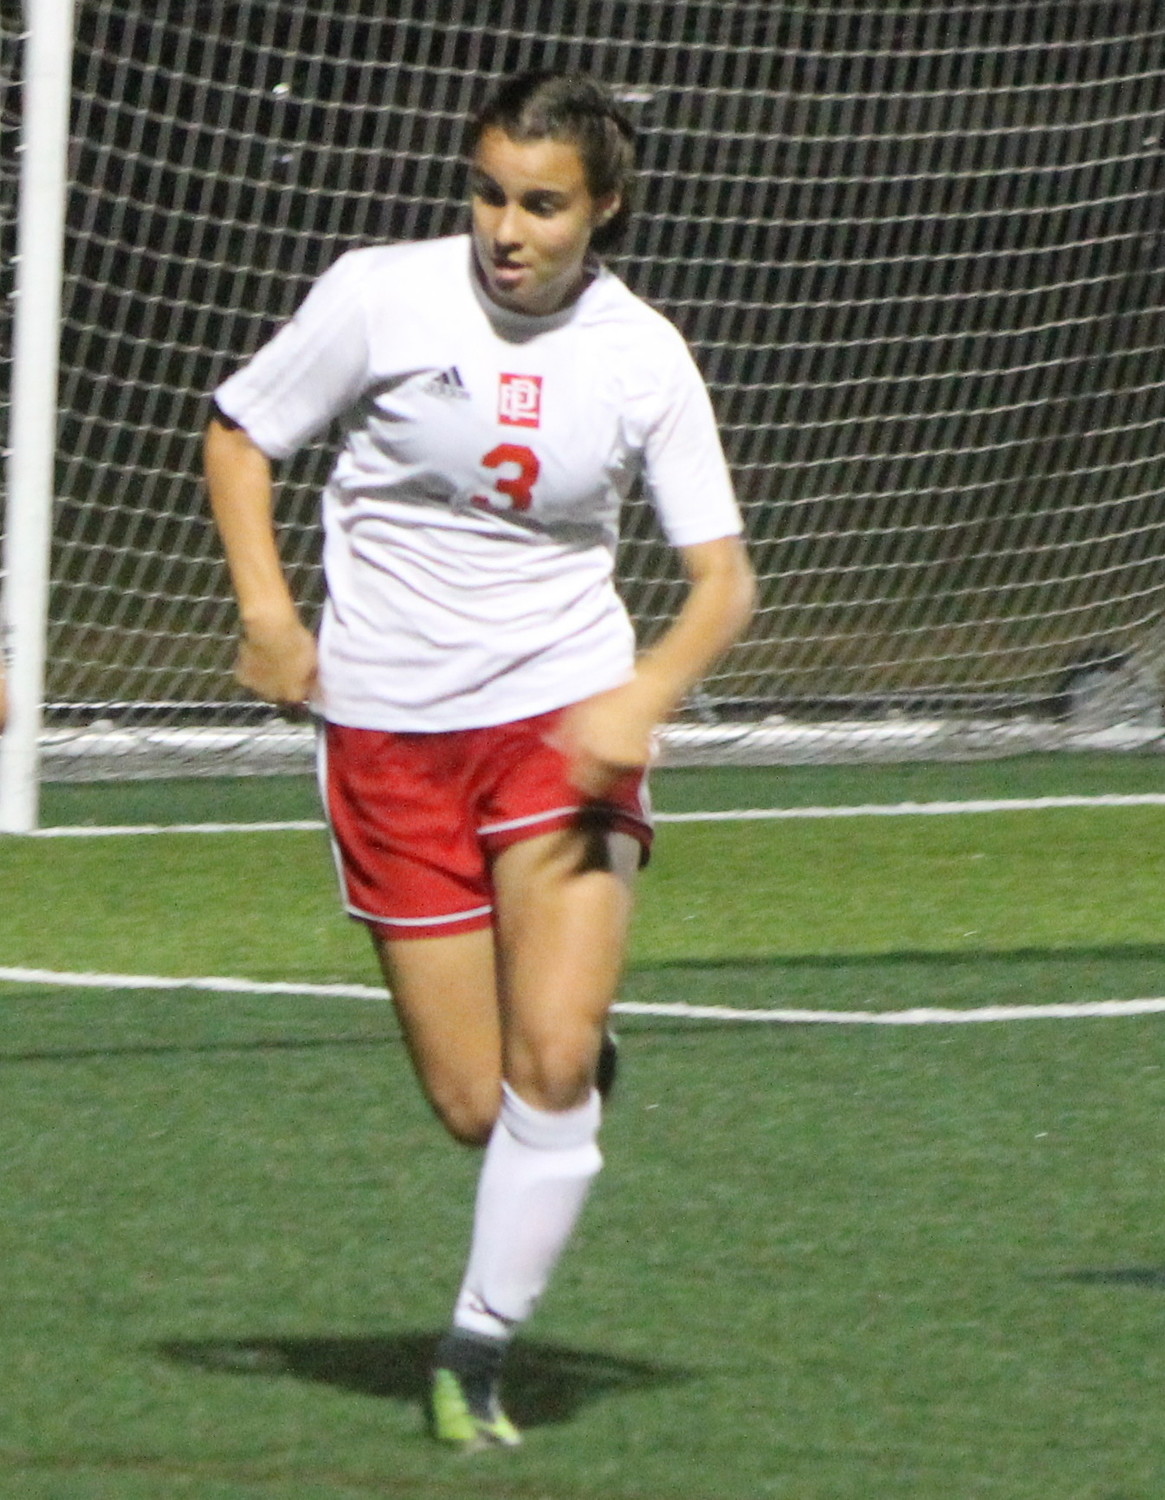 Alyssa DeOliveira netted a hat-trick for the Townies in their semifinal win over Narragansett.